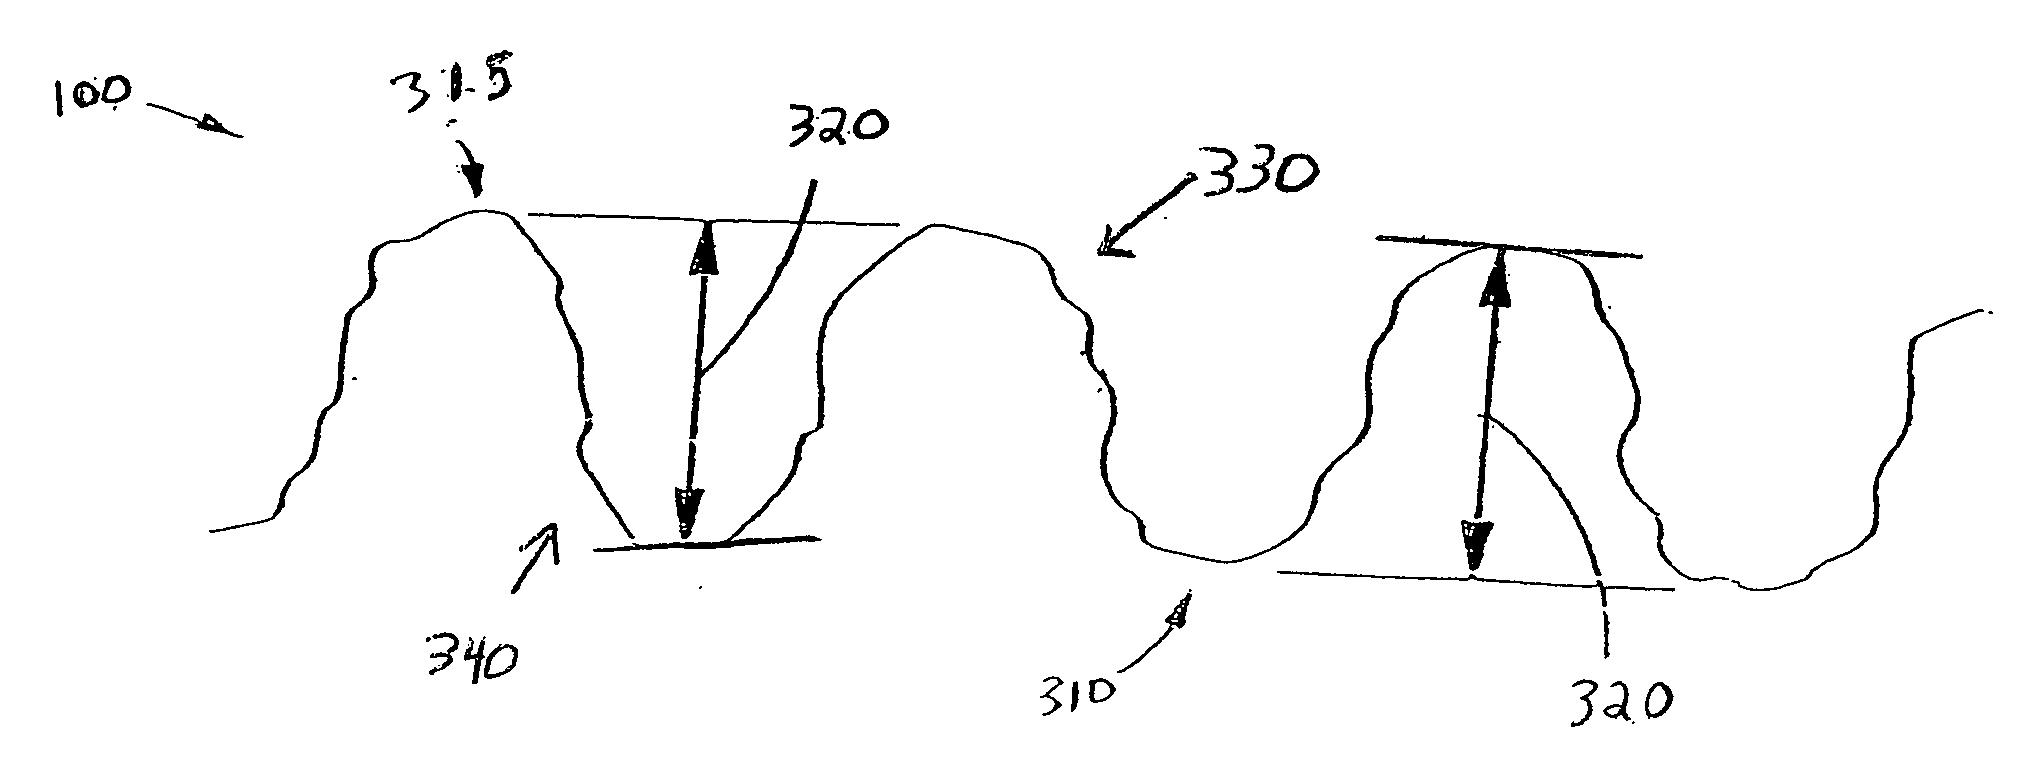 Process for high engagement embossing on substrate having non-uniform stretch characteristics